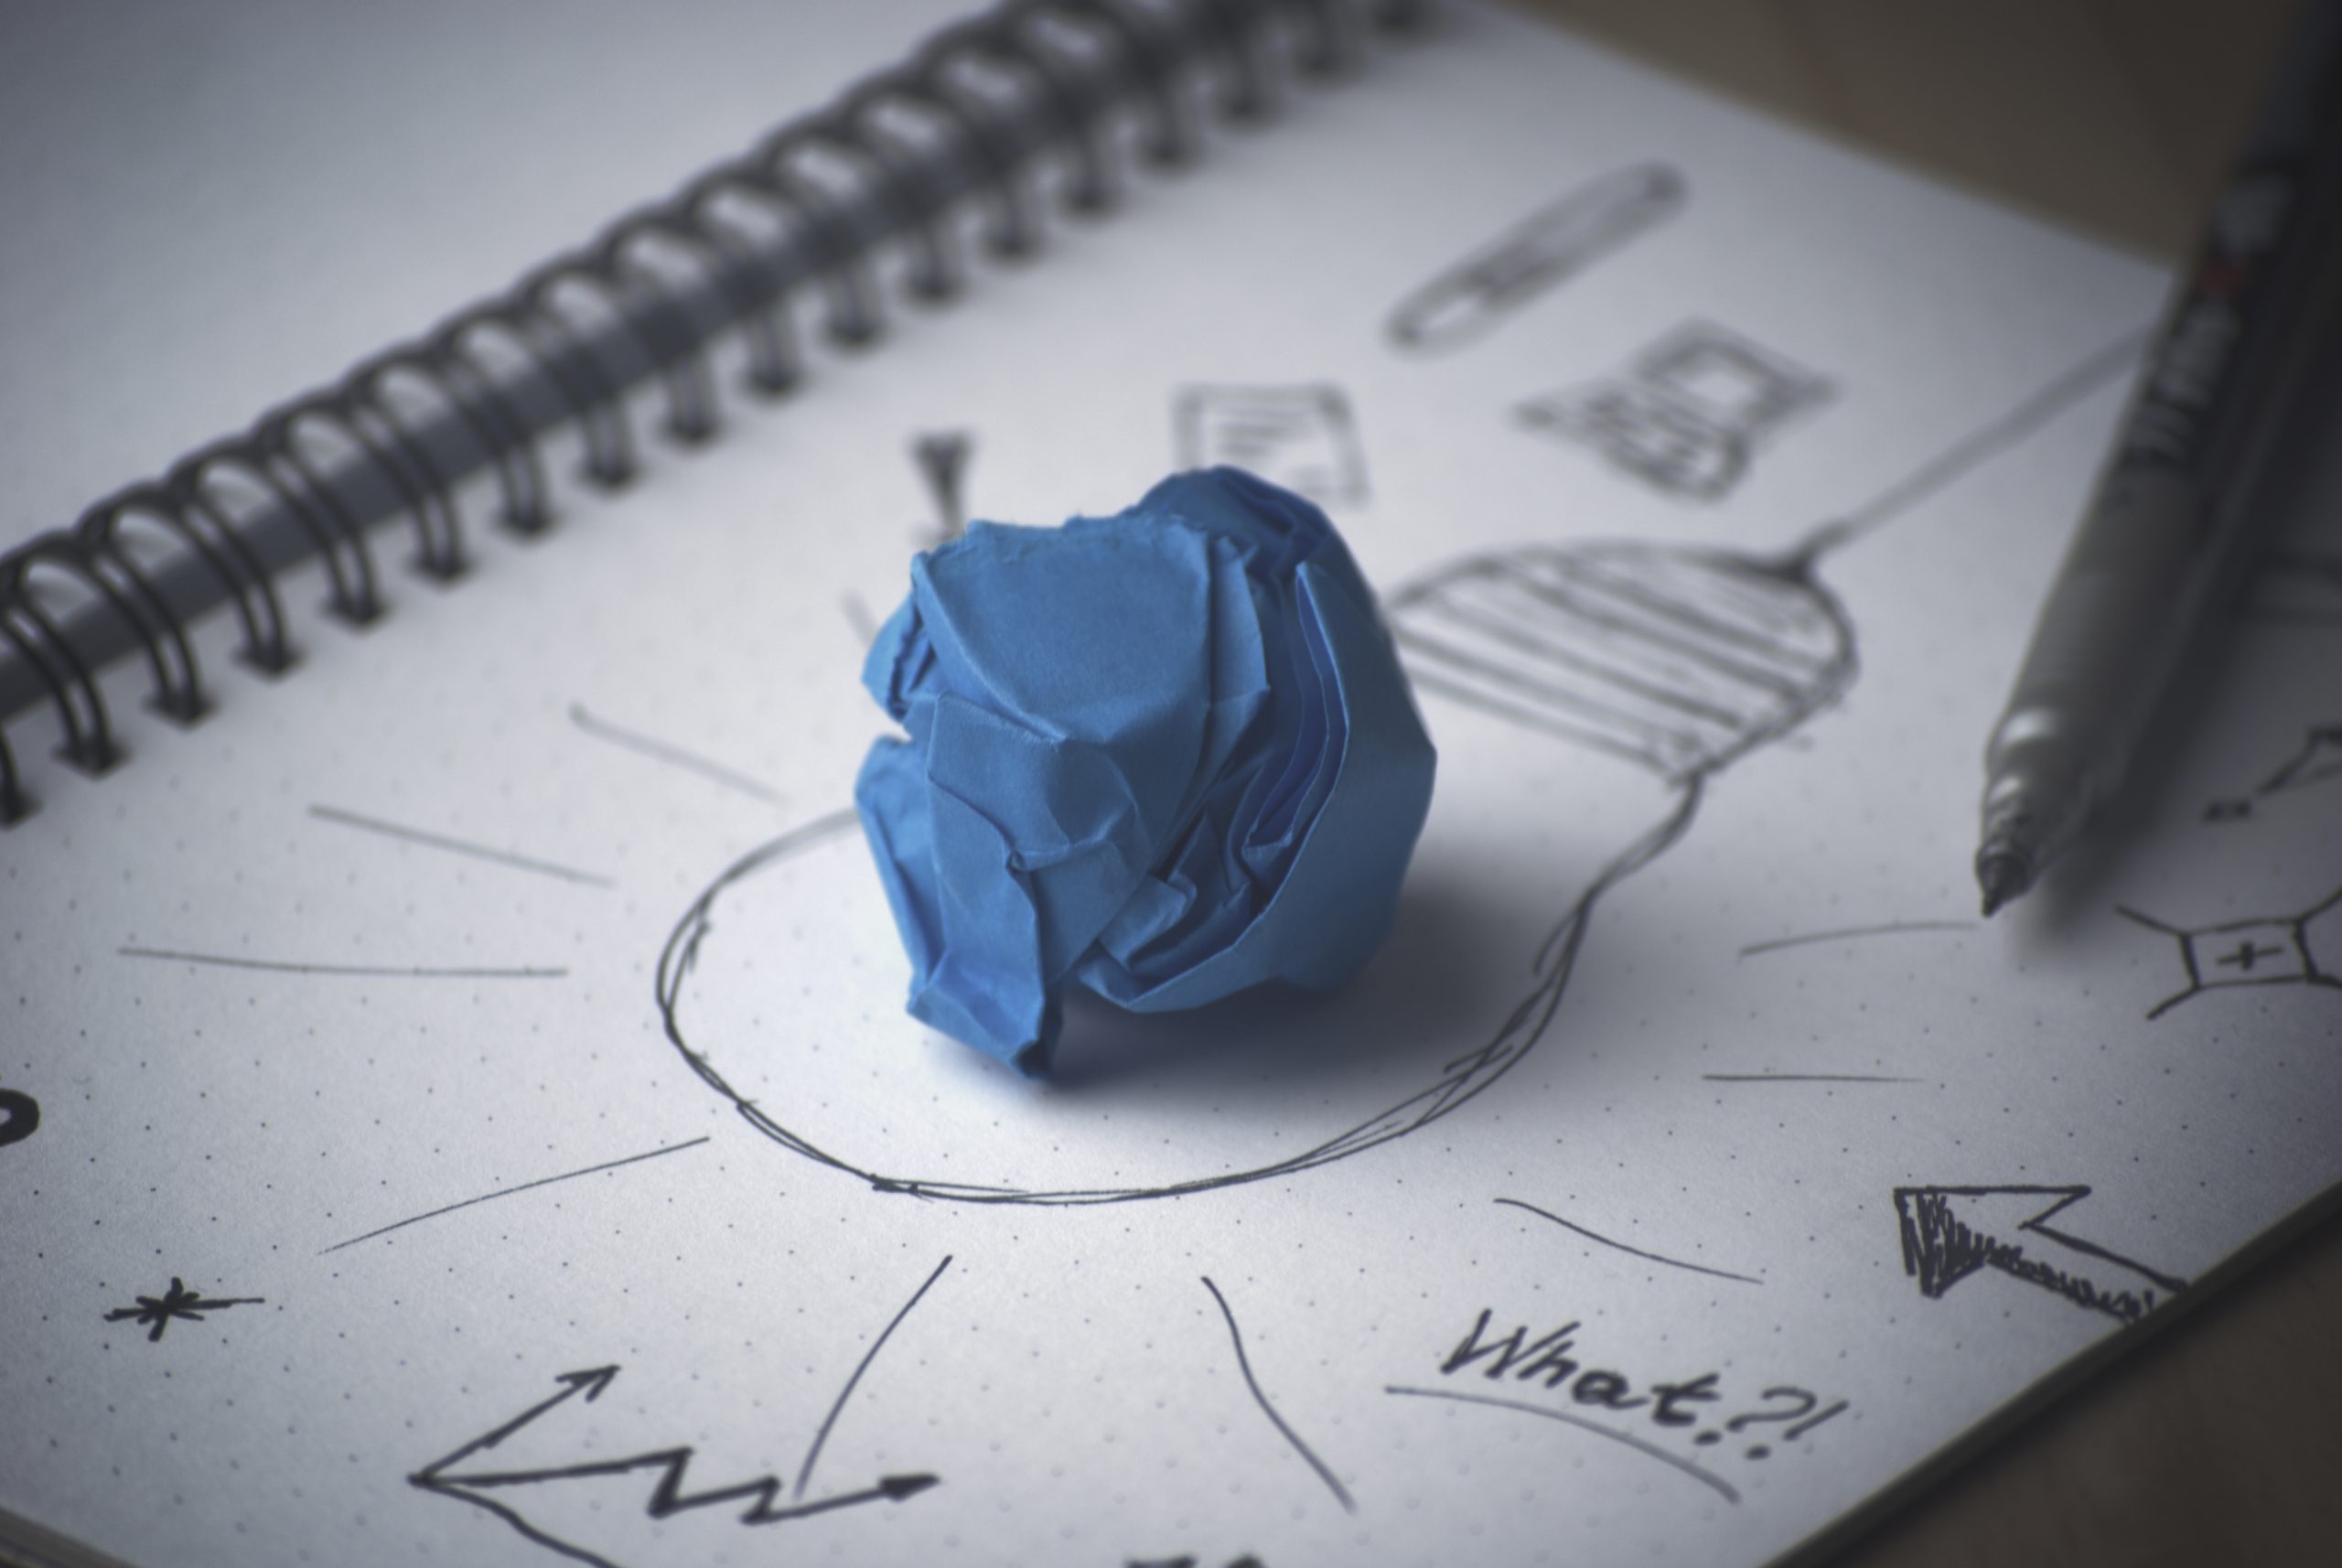 have an innovative idea? check out Innovation for Utilities